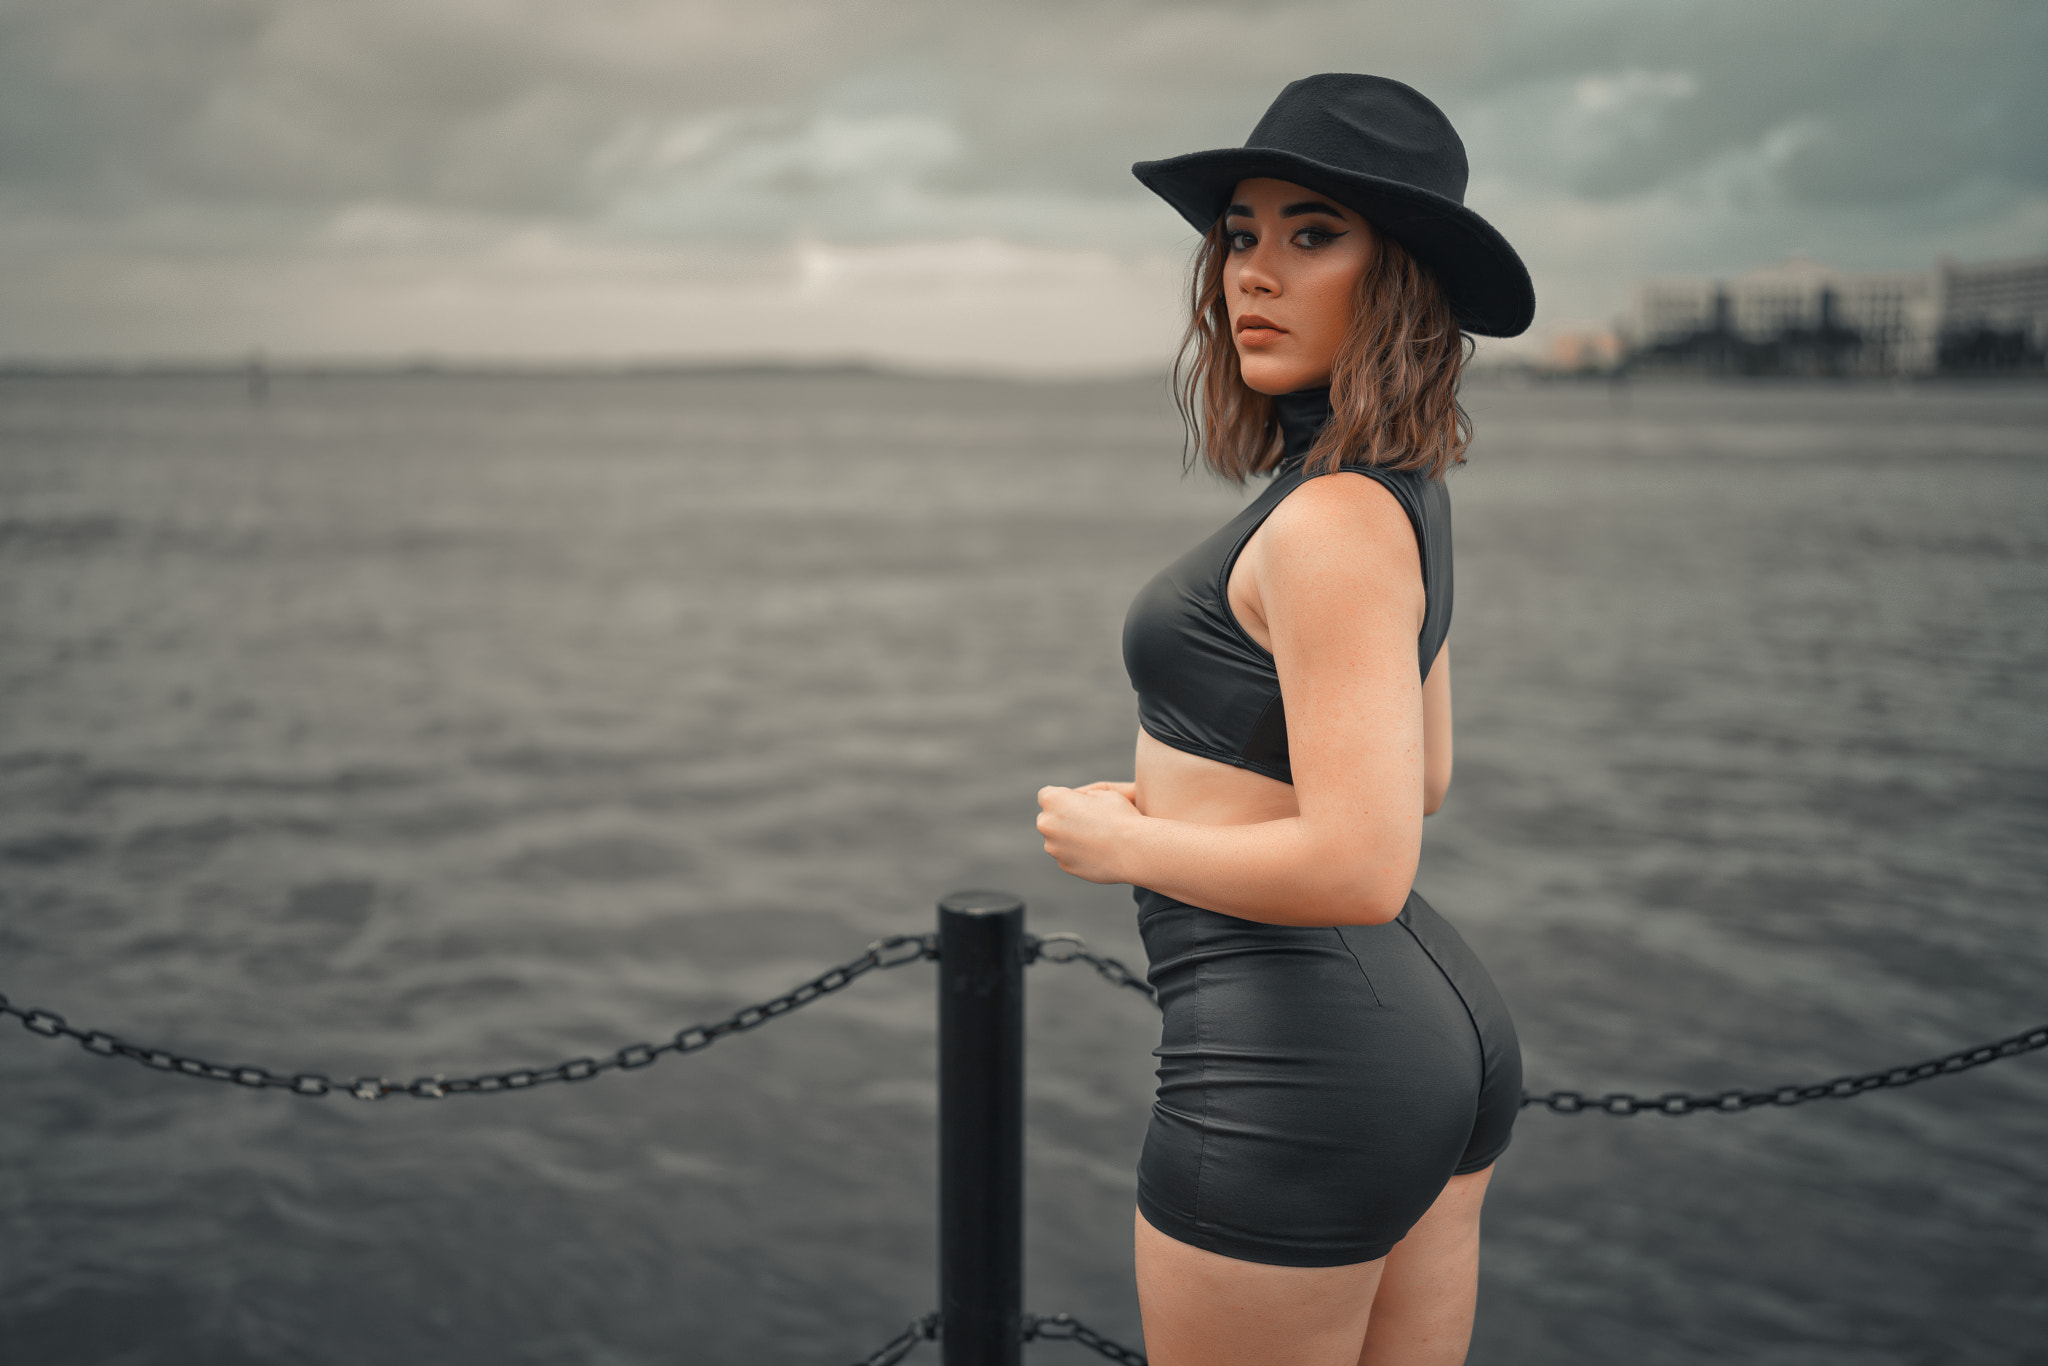 Women Hat Women Outdoors Looking At Viewer Sea Black Clothing Black Hat Chains Eyeliner Fence 2048x1366